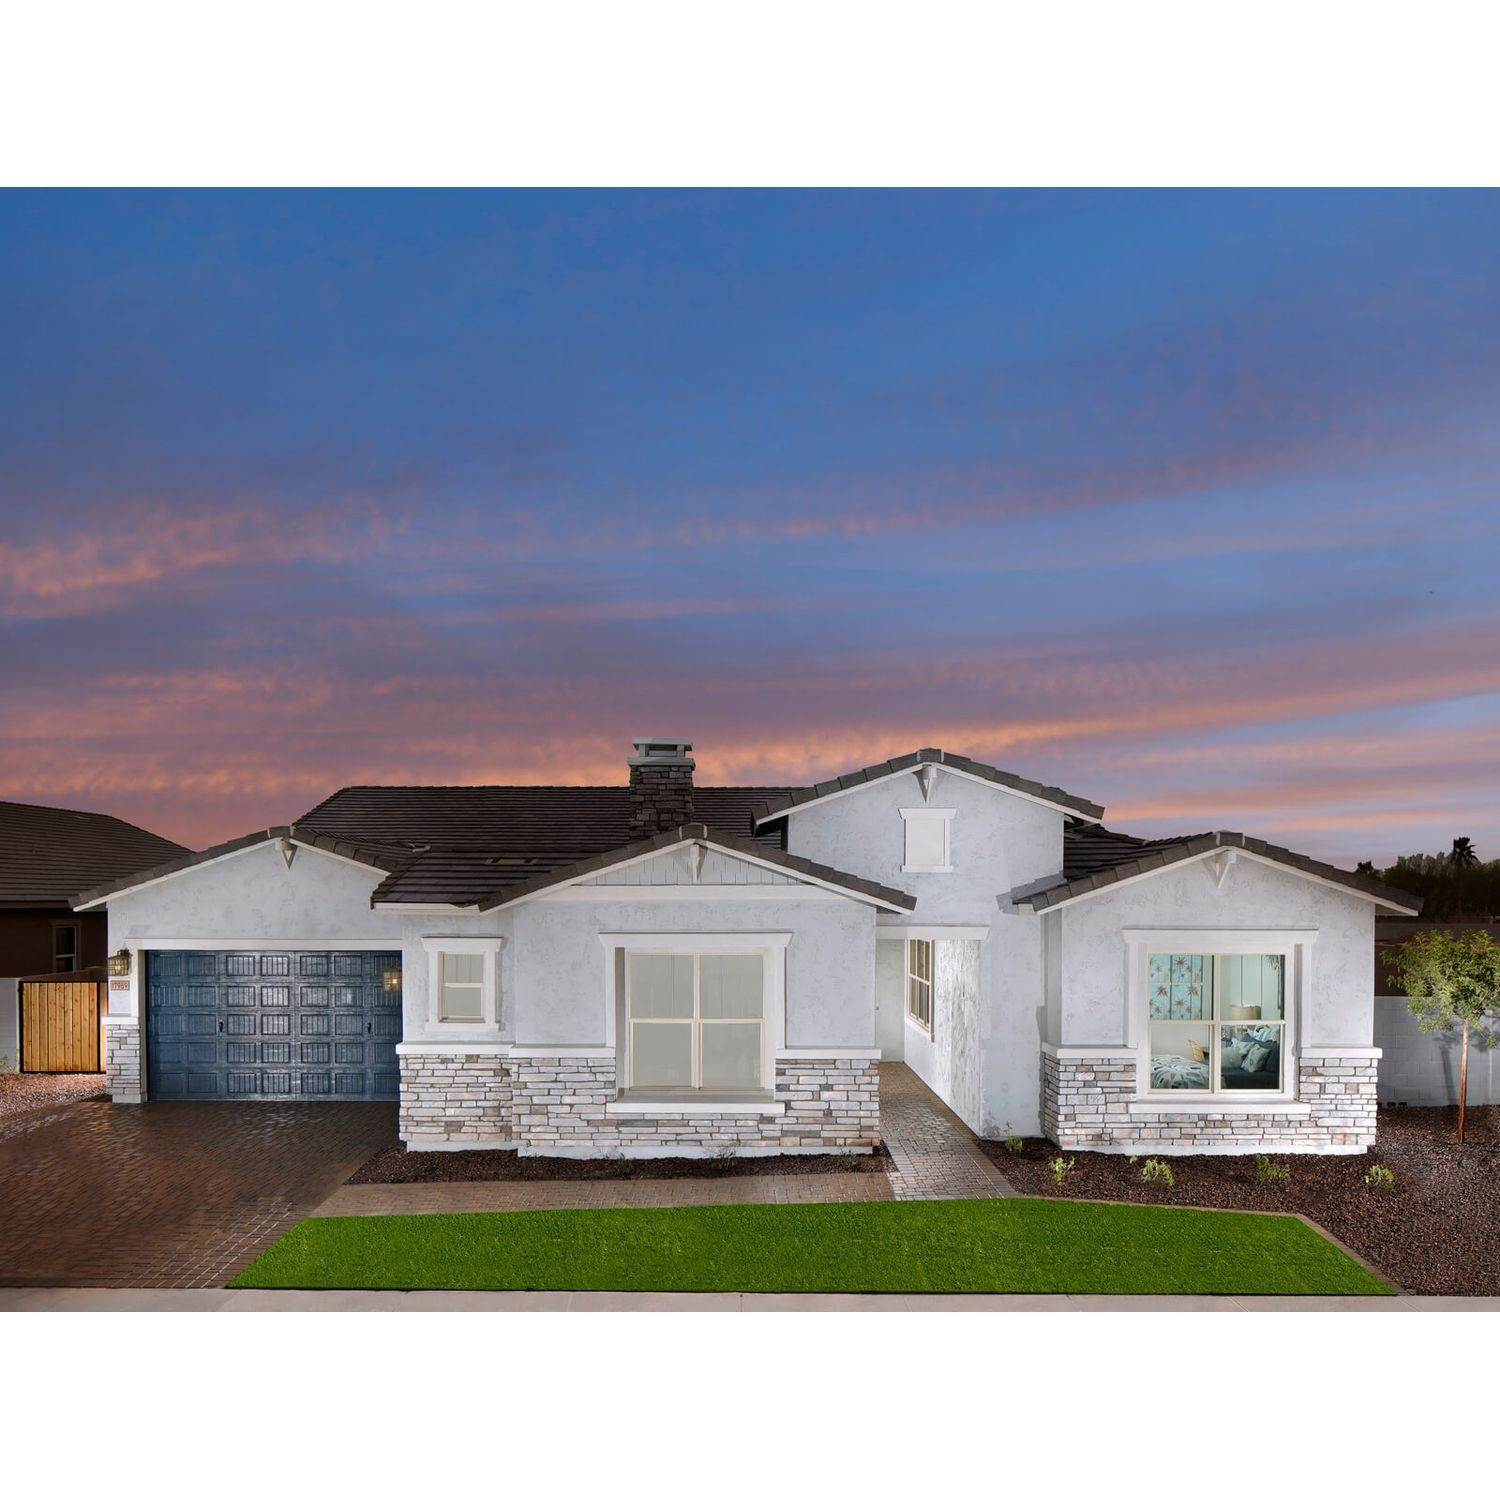 1. Single Family for Sale at Goodyear, AZ 85395